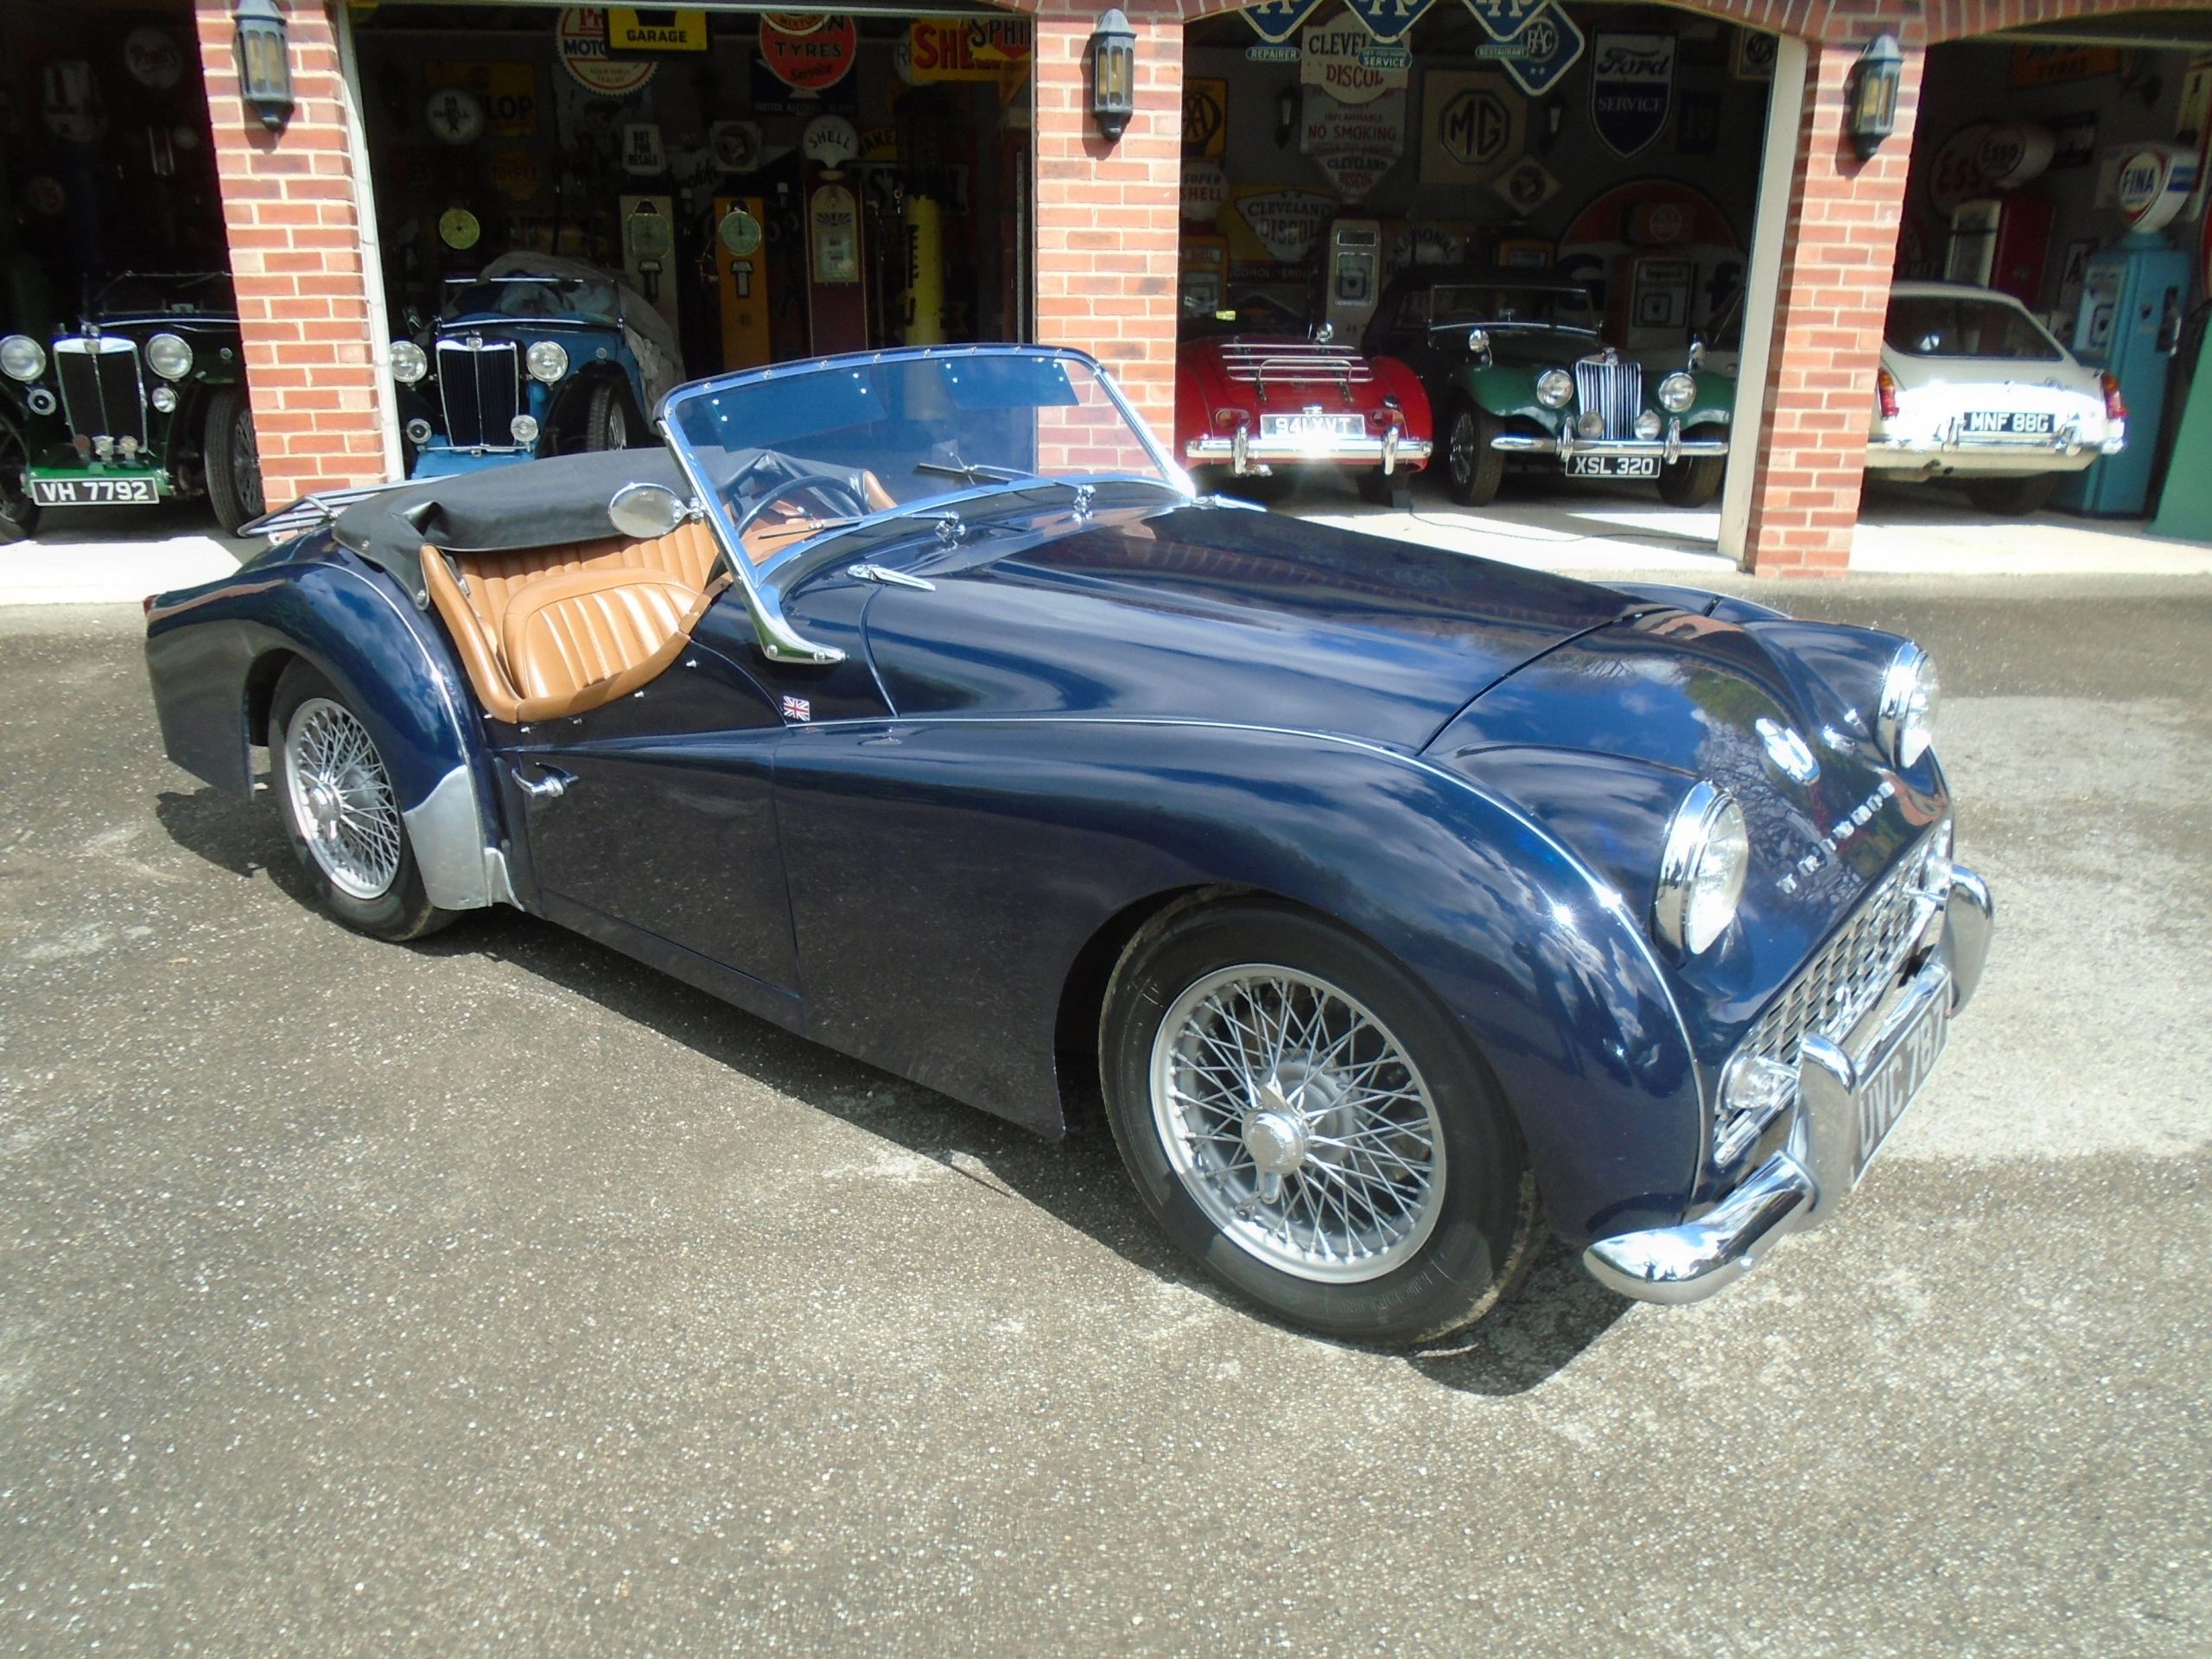 1959 Triumph TR3A with Overdrive